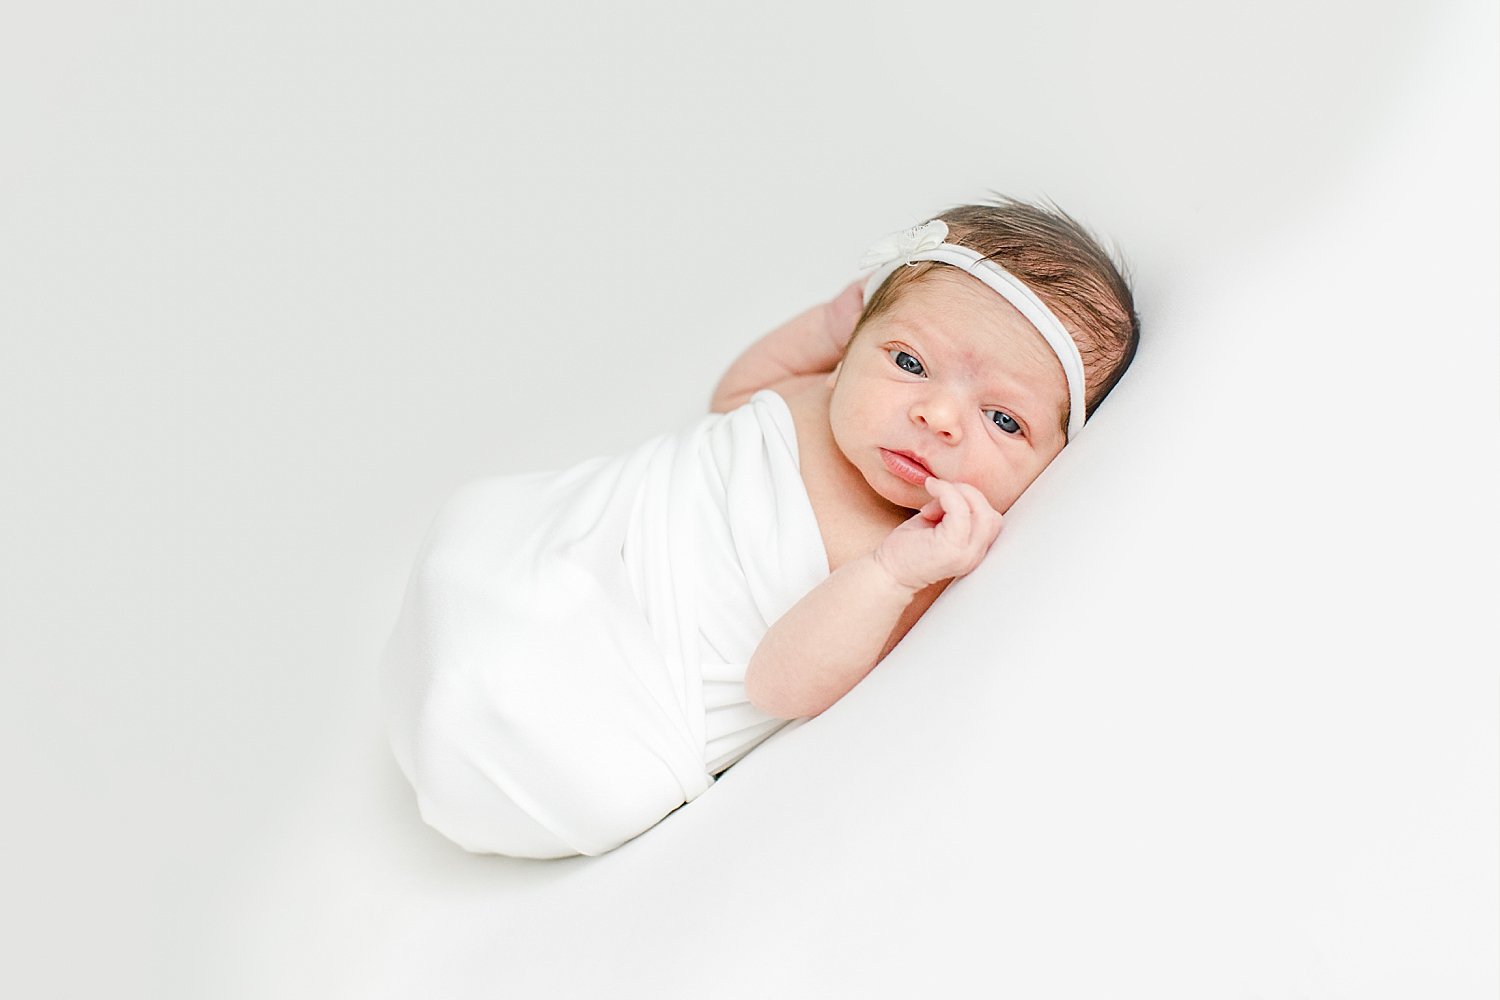 Baby girl swaddled in white for newborn photos with Kristin Wood Photography.Newborn baby girl awake during photoshoot | Kristin Wood Photography